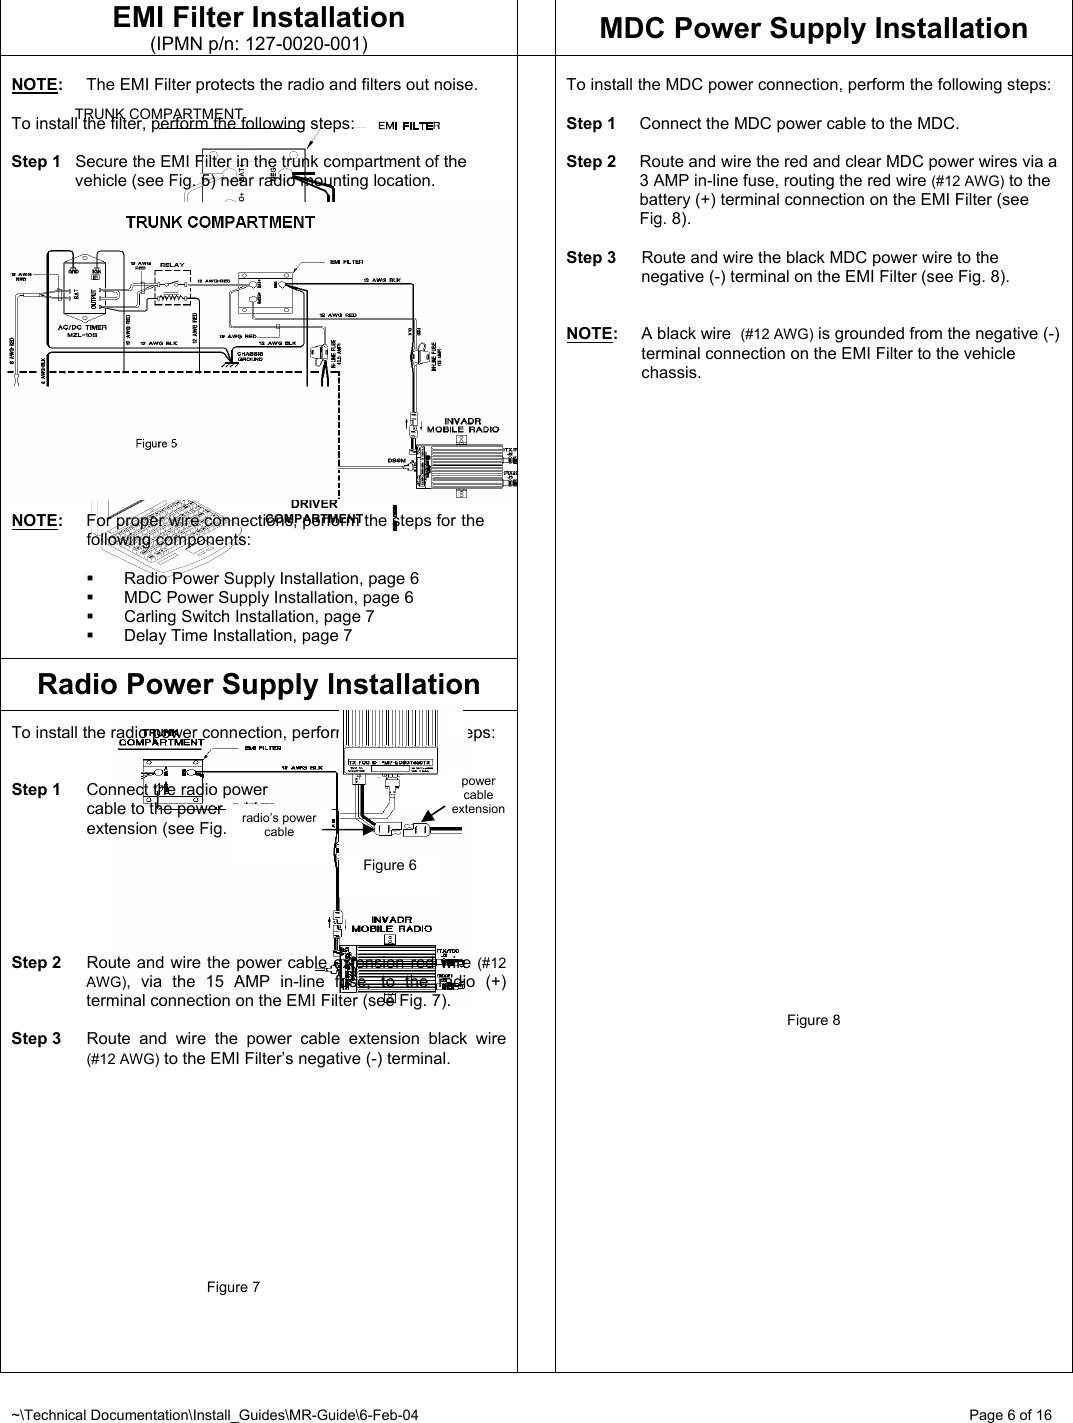 ~\Technical Documentation\Install_Guides\MR-Guide\6-Feb-04   Page 6 of 16 DRIVER COMPARTMENT TRUNK COMPARTMENT EMI Filter Installation (IPMN p/n: 127-0020-001)  MDC Power Supply Installation  NOTE:  The EMI Filter protects the radio and filters out noise.  To install the filter, perform the following steps:  Step 1  Secure the EMI Filter in the trunk compartment of the vehicle (see Fig. 5) near radio mounting location.   NOTE:  For proper wire connections, perform the steps for  the  following components:    Radio Power Supply Installation, page 6   MDC Power Supply Installation, page 6   Carling Switch Installation, page 7   Delay Time Installation, page 7  Radio Power Supply Installation  To install the radio power connection, perform the following steps:   Step 1  Connect the radio power   cable to the power cable    extension (see Fig. 6).       Step 2  Route and wire the power cable extension red wire (#12 AWG), via the 15 AMP in-line fuse, to the radio (+) terminal connection on the EMI Filter (see Fig. 7).  Step 3  Route and wire the power cable extension black wire (#12 AWG) to the EMI Filter’s negative (-) terminal.                                           Figure 7       To install the MDC power connection, perform the following steps:  Step 1  Connect the MDC power cable to the MDC.  Step 2  Route and wire the red and clear MDC power wires via a 3 AMP in-line fuse, routing the red wire (#12 AWG) to the battery (+) terminal connection on the EMI Filter (see Fig. 8).  Step 3  Route and wire the black MDC power wire to the negative (-) terminal on the EMI Filter (see Fig. 8).   NOTE:  A black wire  (#12 AWG) is grounded from the negative (-) terminal connection on the EMI Filter to the vehicle chassis.                                   Figure 8           radio’s power cable power cable extensionFigure 6 